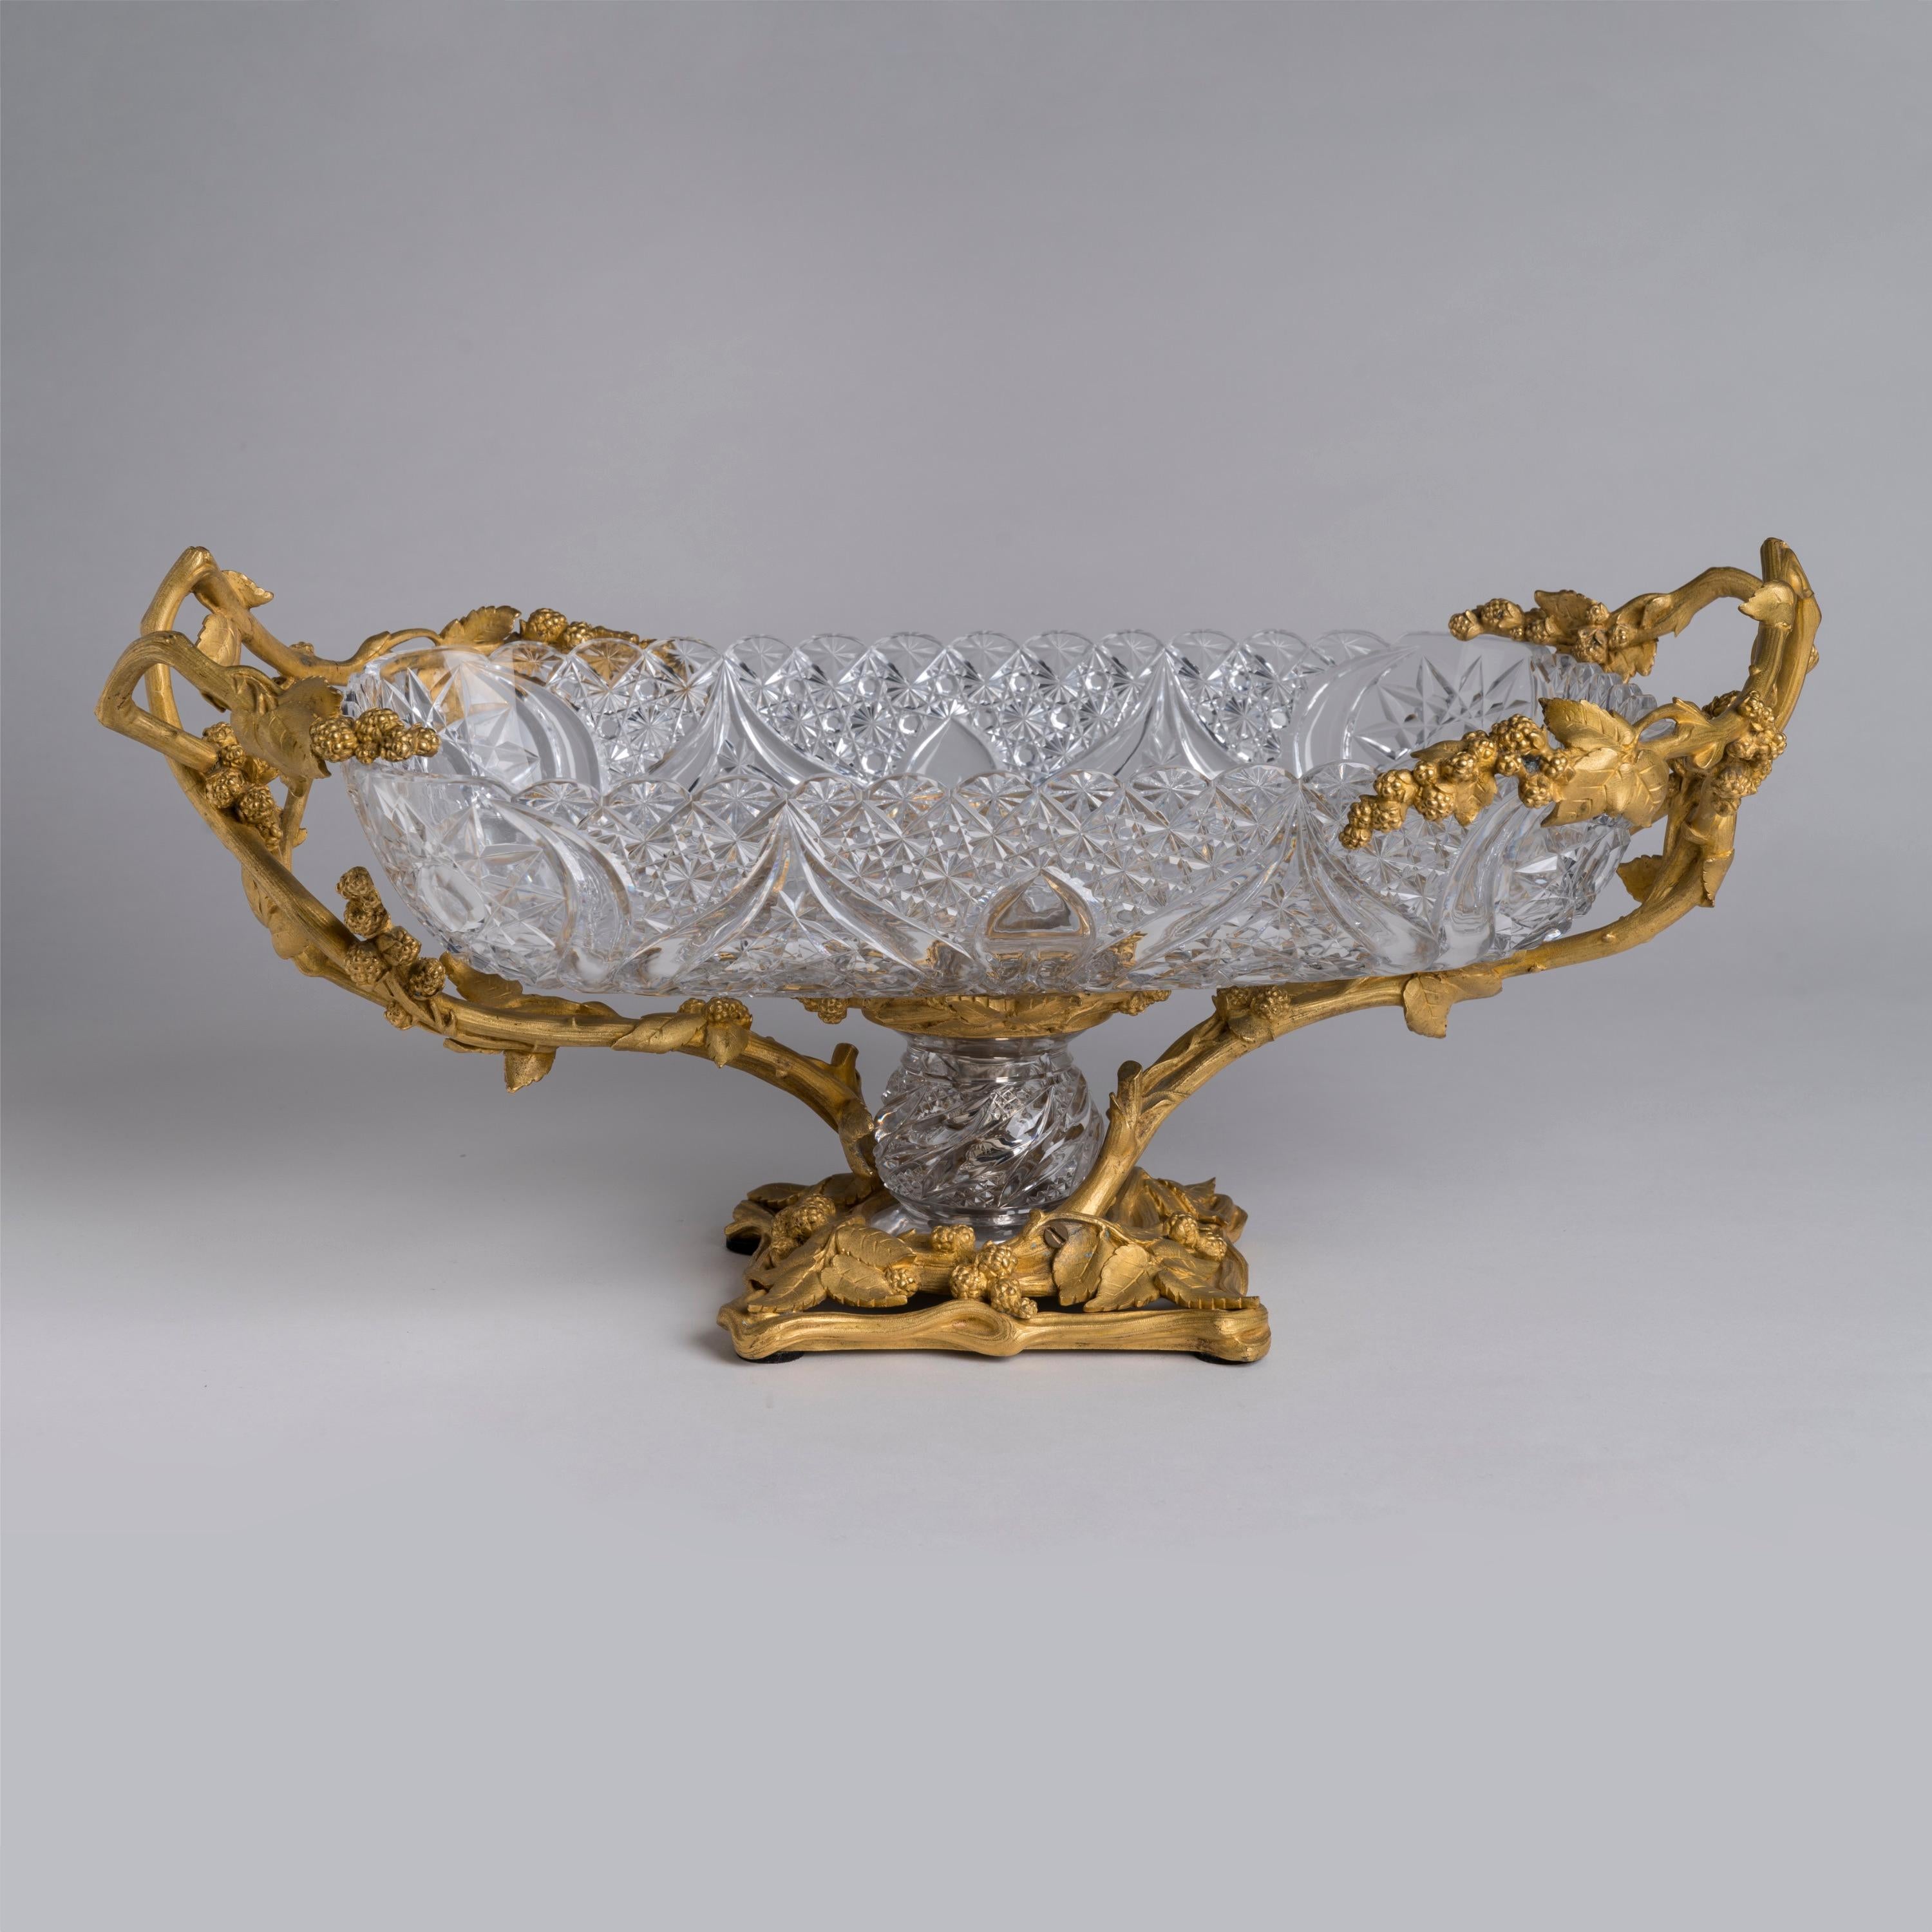 A Fine Ormolu-Mounted Cut Crystal Centrepiece
Firmly Attributed to Baccarat

A large and exceptional glass centrepiece set within a gilded bronze mounted frame, modelled in a naturalistic fashion with branches, leaves and trailing fruit, the